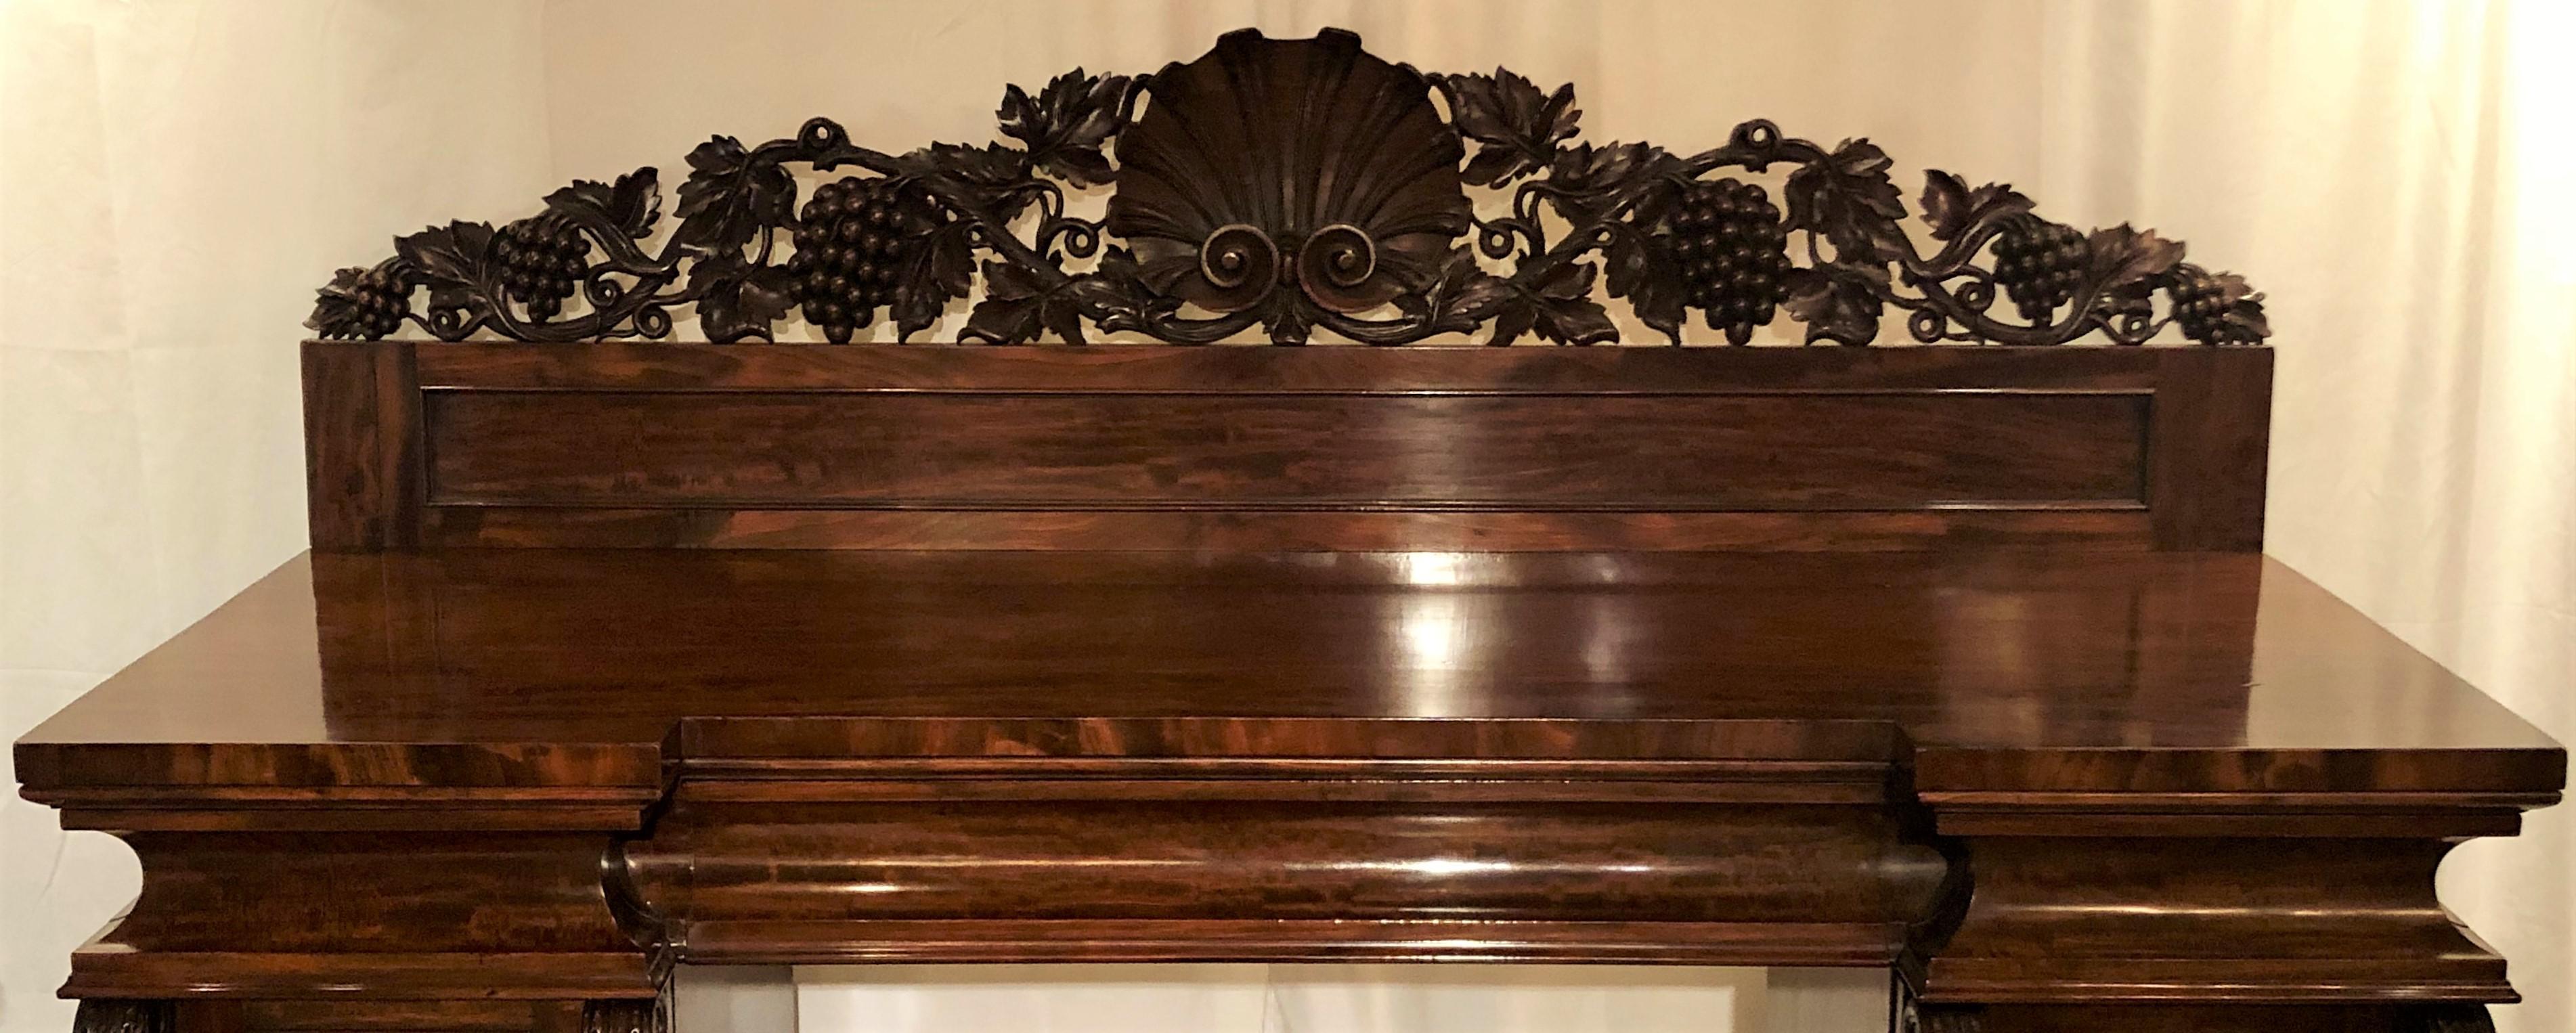 This sideboard has lovely, rich carving. The richly carved top can be removed if you wish to have a more linear sideboard.